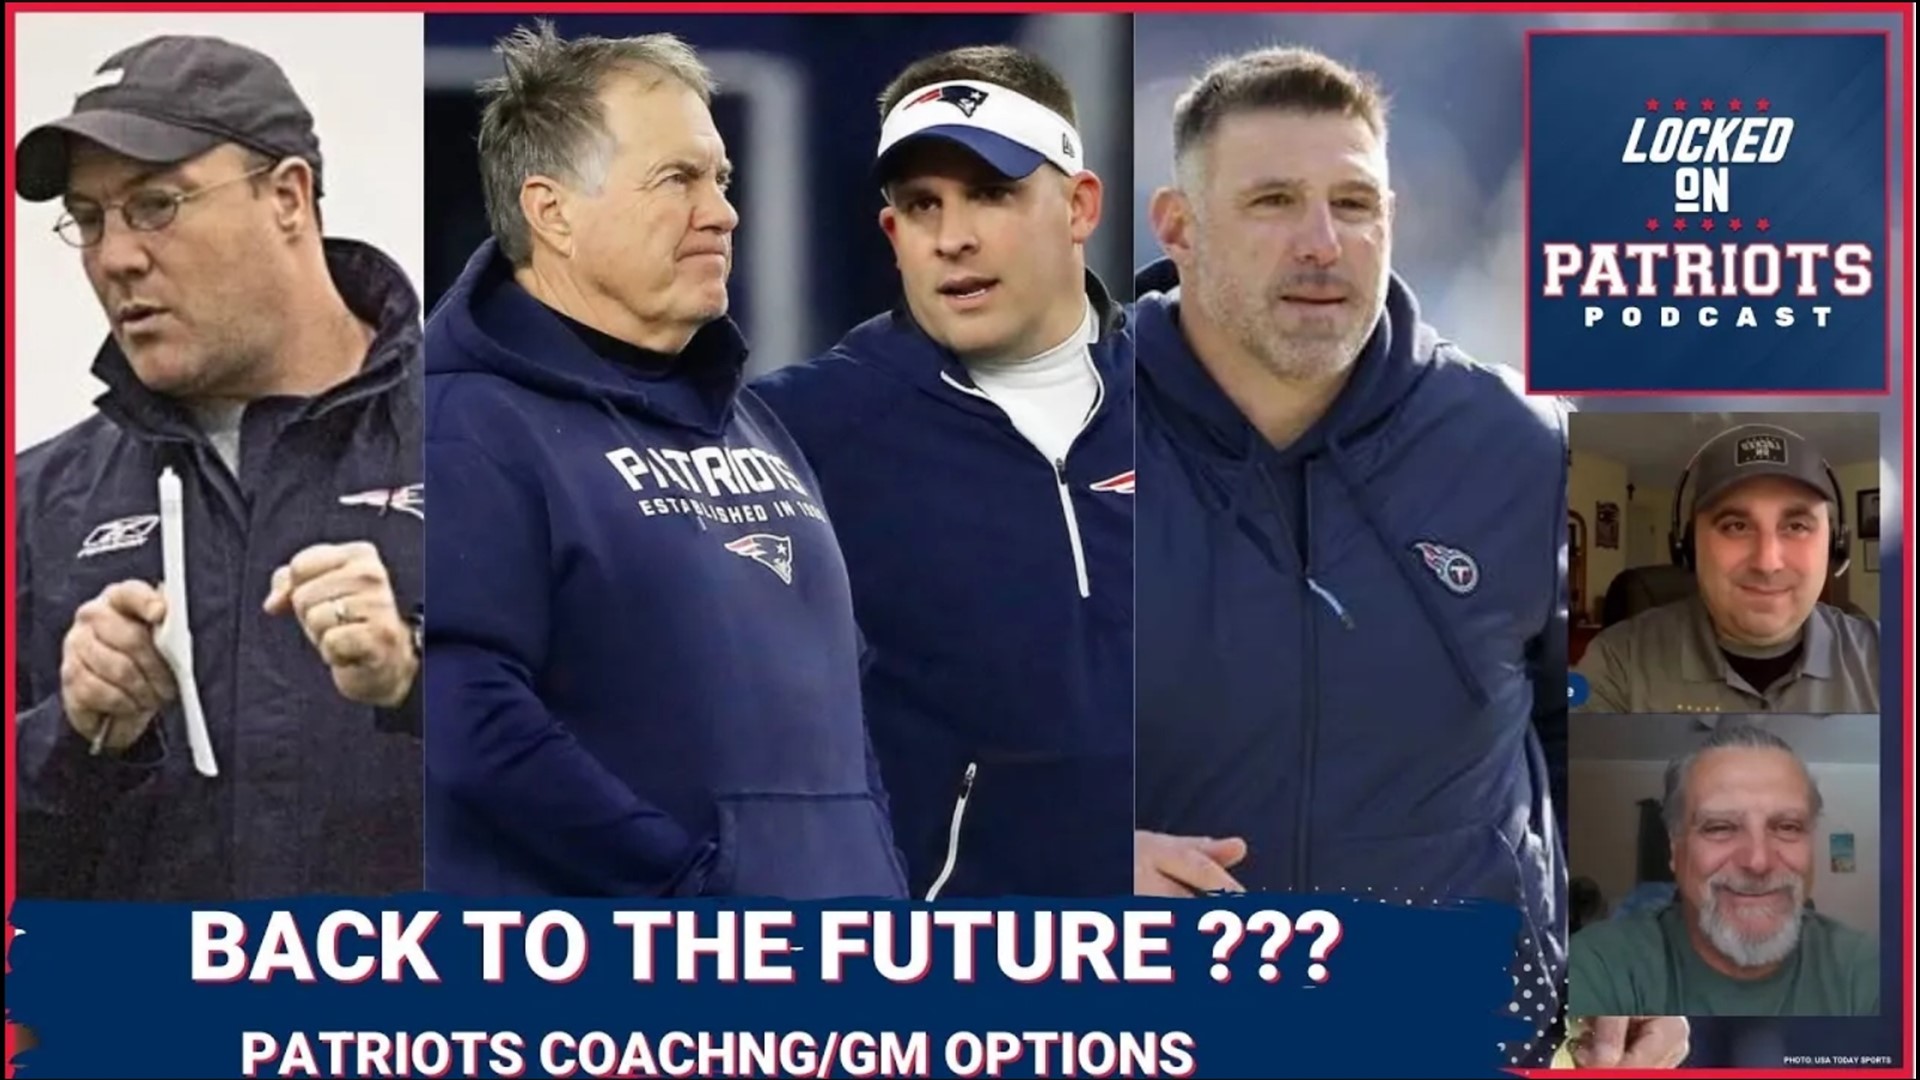 As the New England Patriots attempt to chart the course of both their short-term and long-term future, Pats Nation awaits word from Robert Kraft and team ownership.